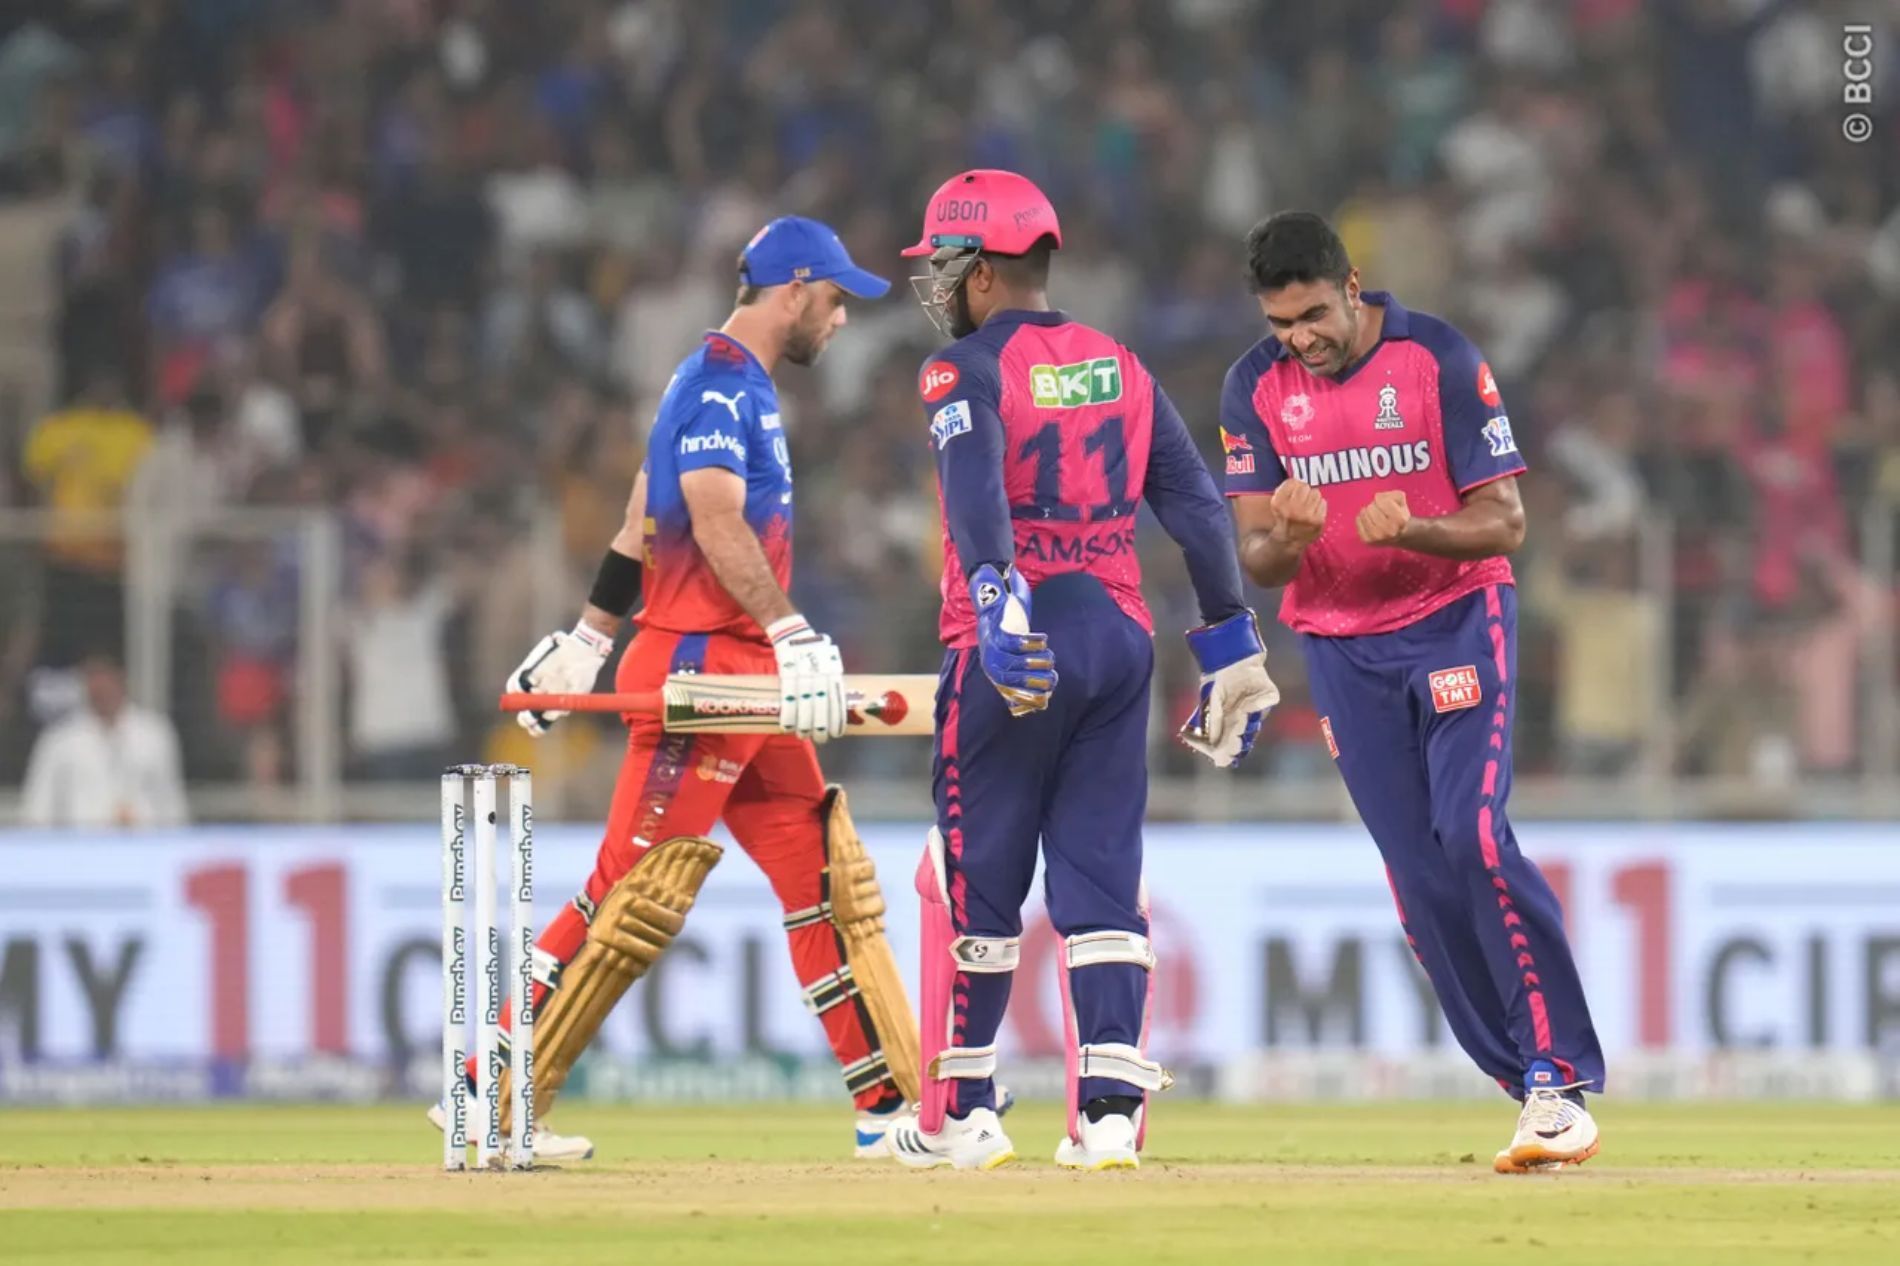 Ravichandran Ashwin stunned RCB with wickets off consecutive deliveries. (Image Credit: BCCI/ iplt20.com)